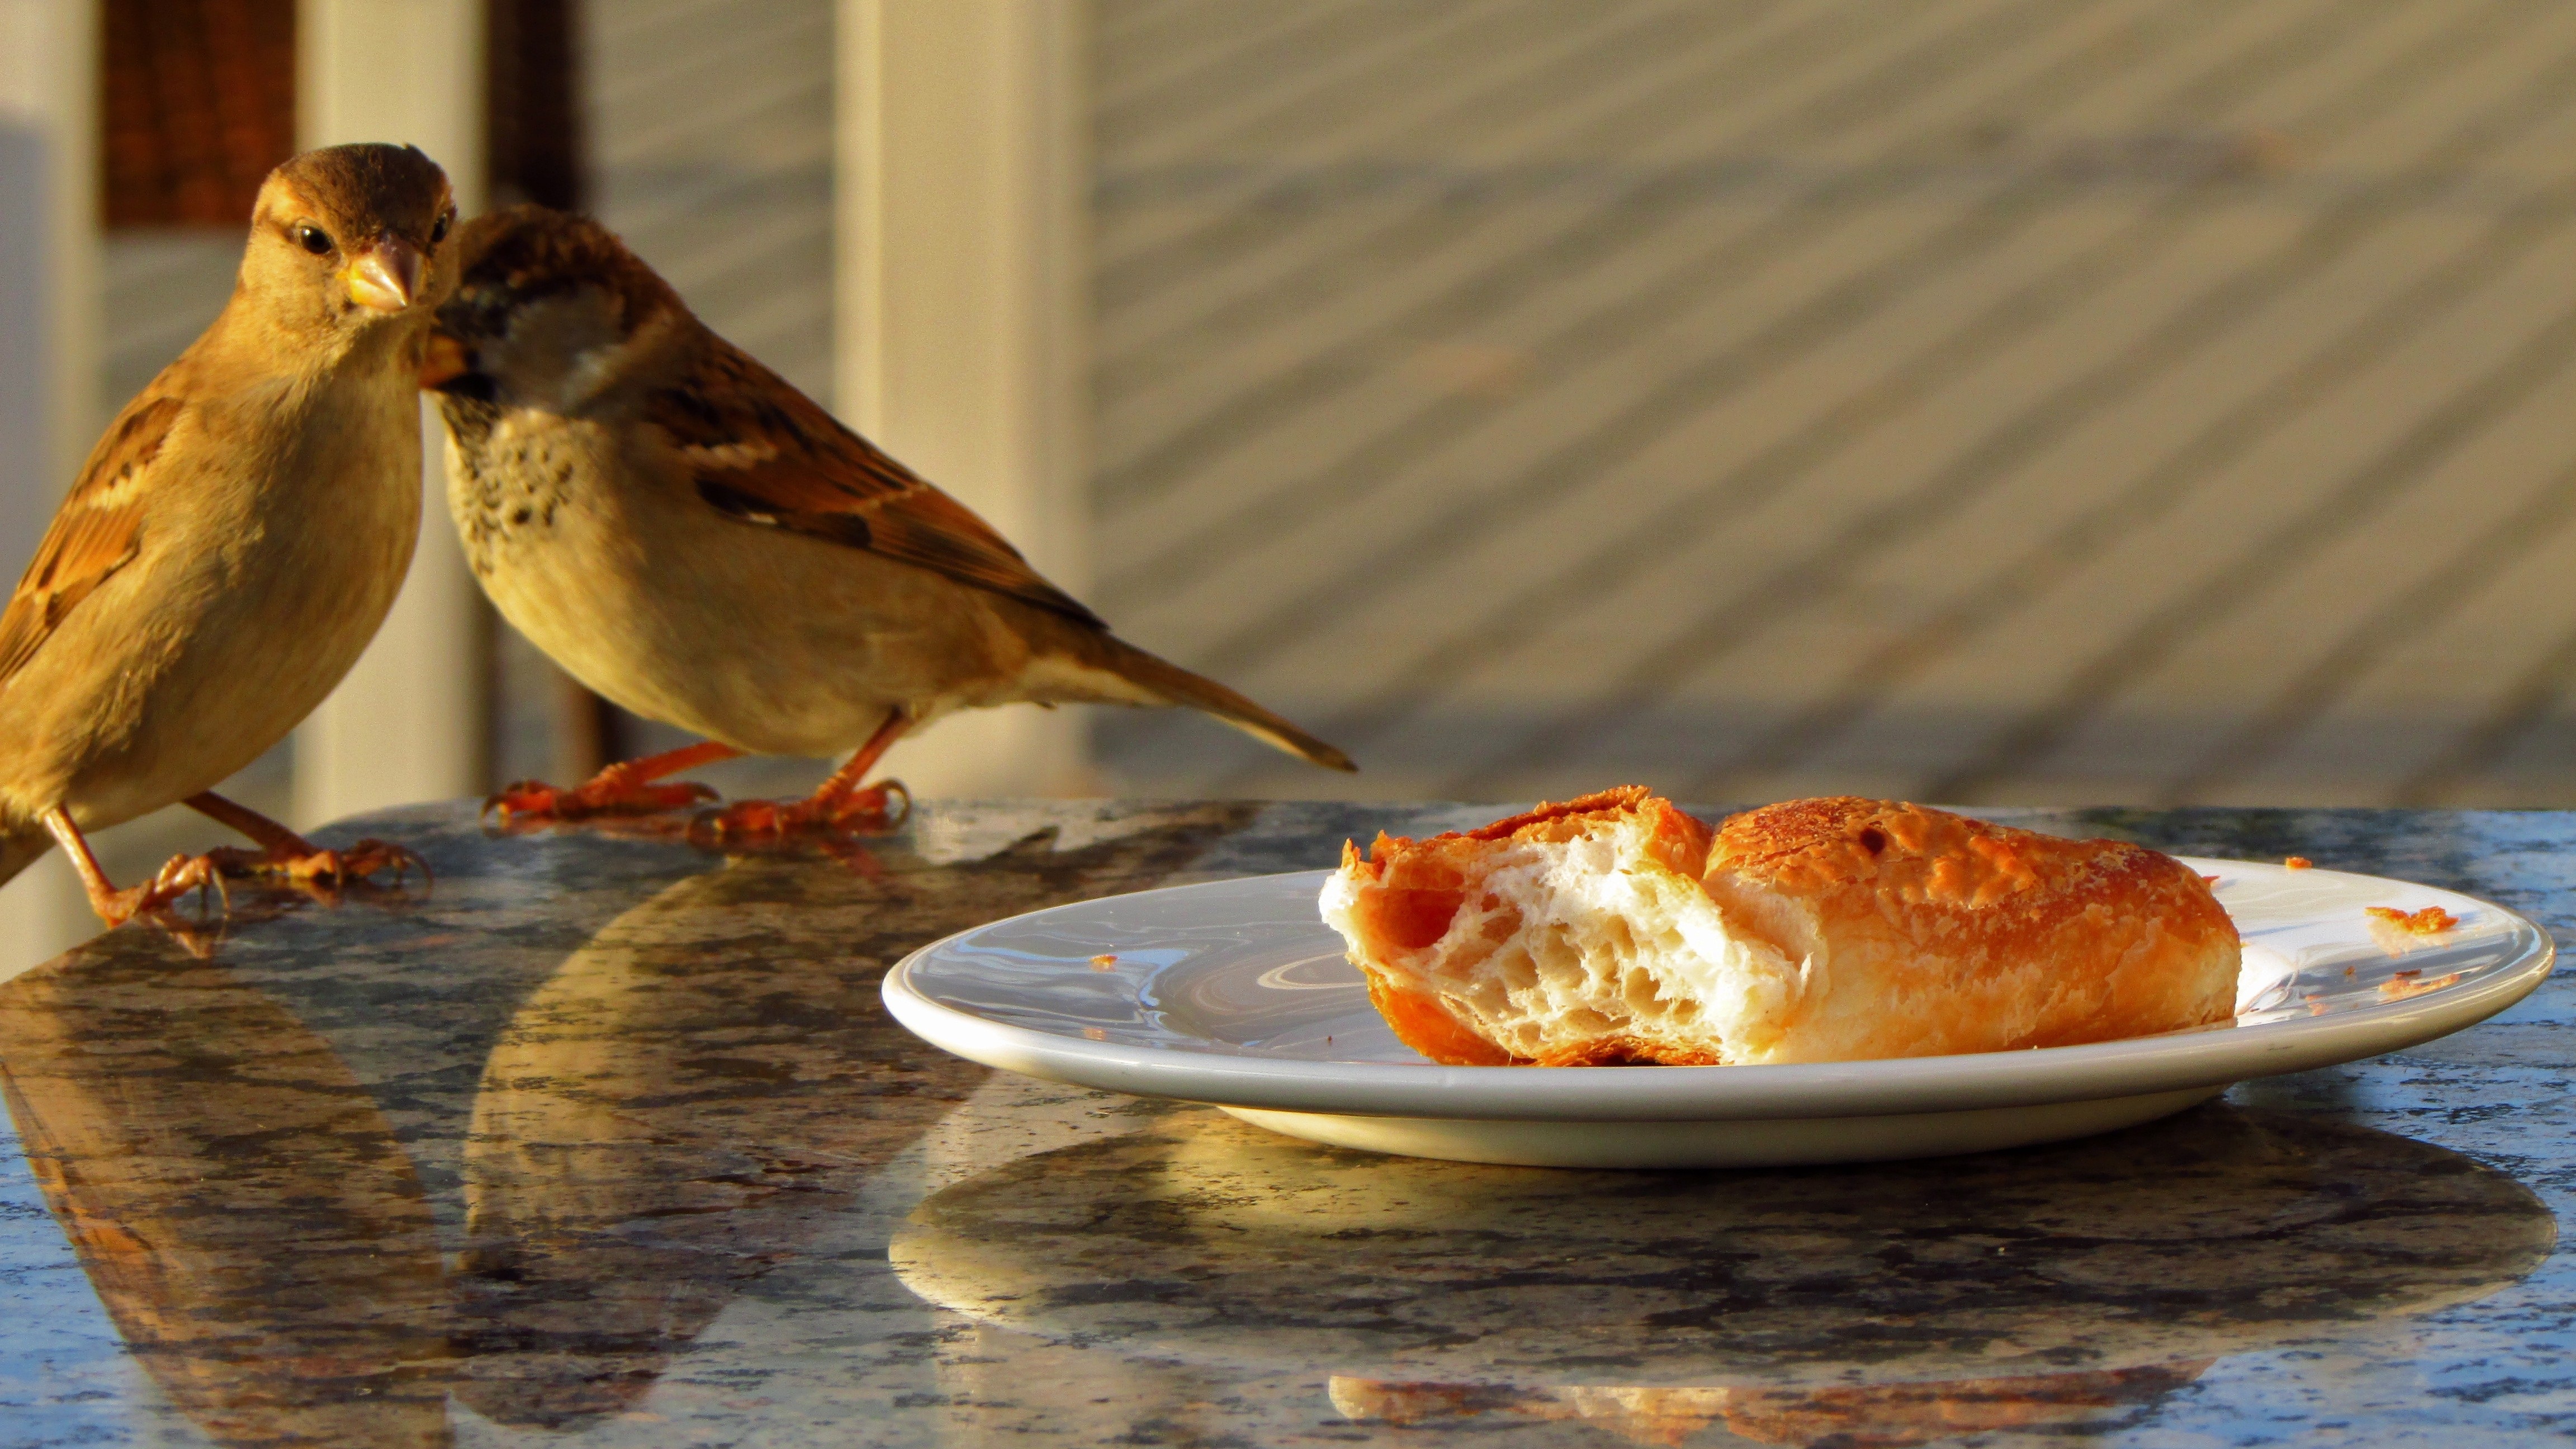 Croissant, Food, Restaurant, Birds, Dish, plate, food and drink